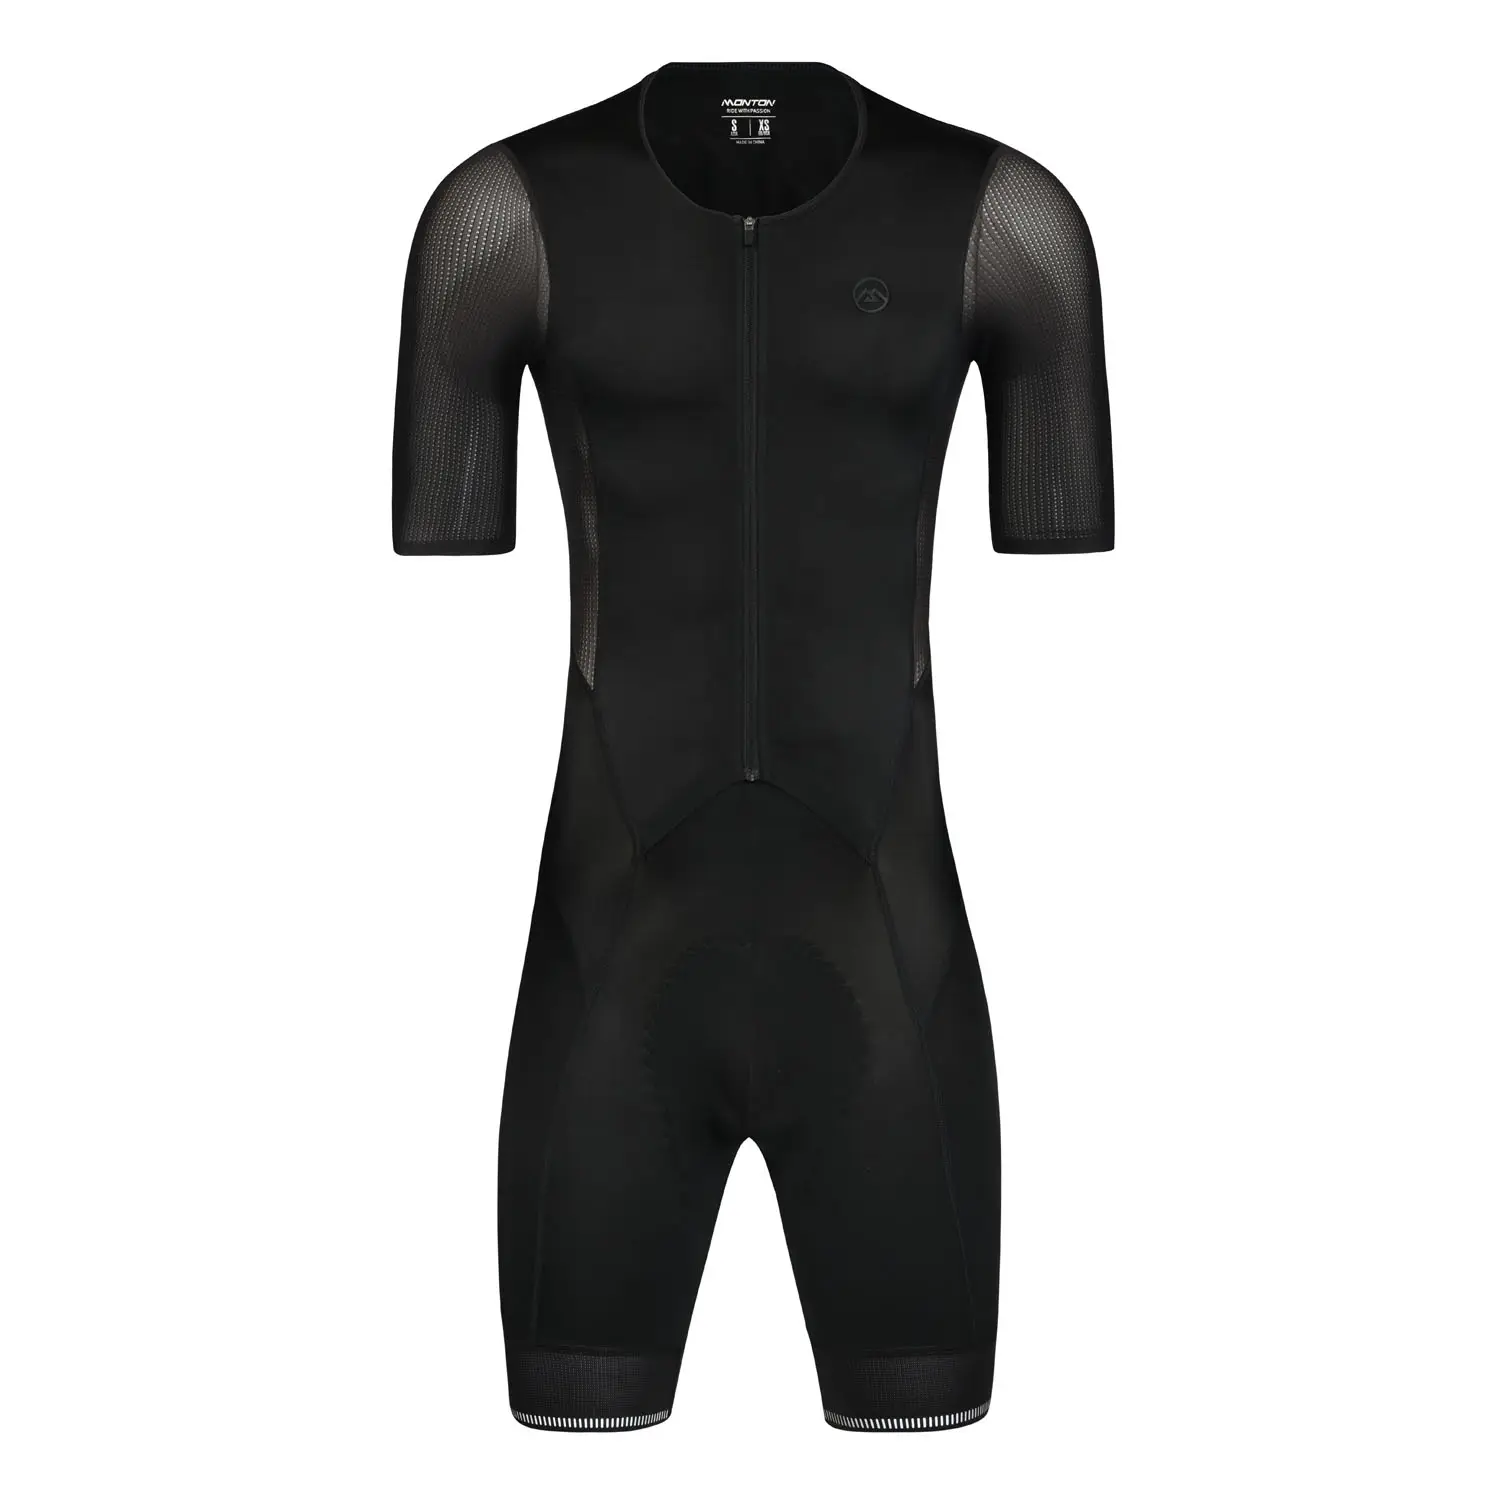 China Manufacture professional cycling Triathlon/Skinsuit